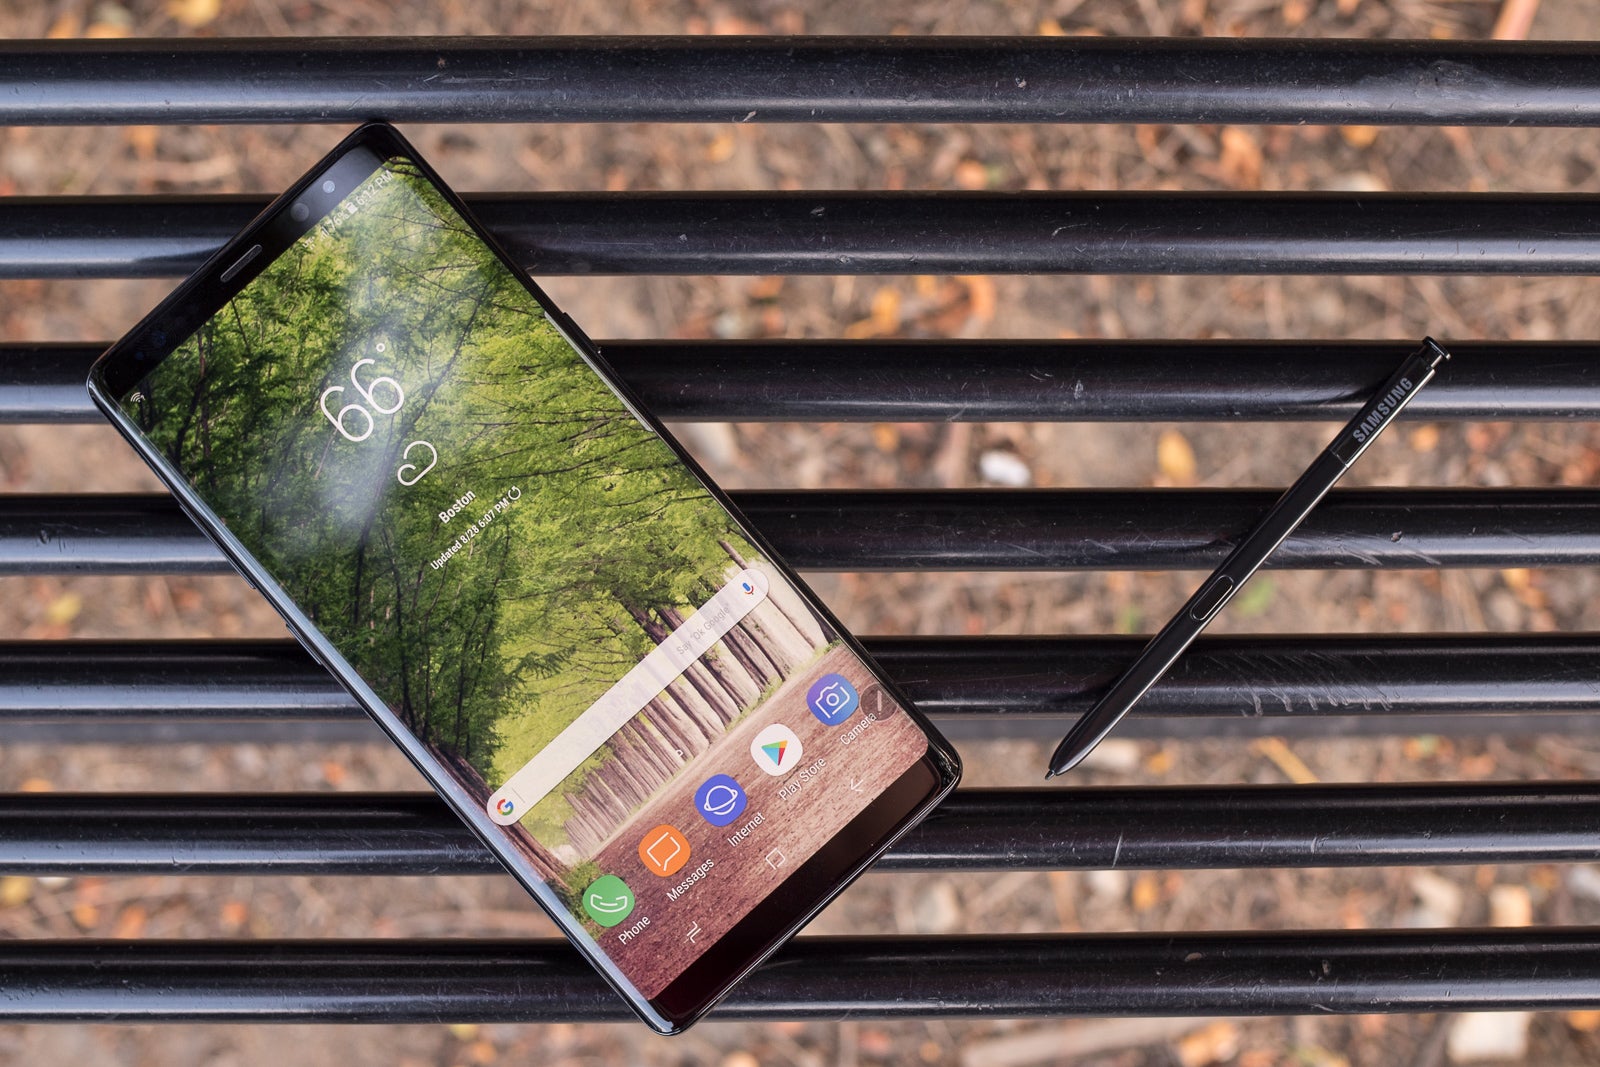 Verizon rolls out new Galaxy Note 8 update, Live focus and security improvements included